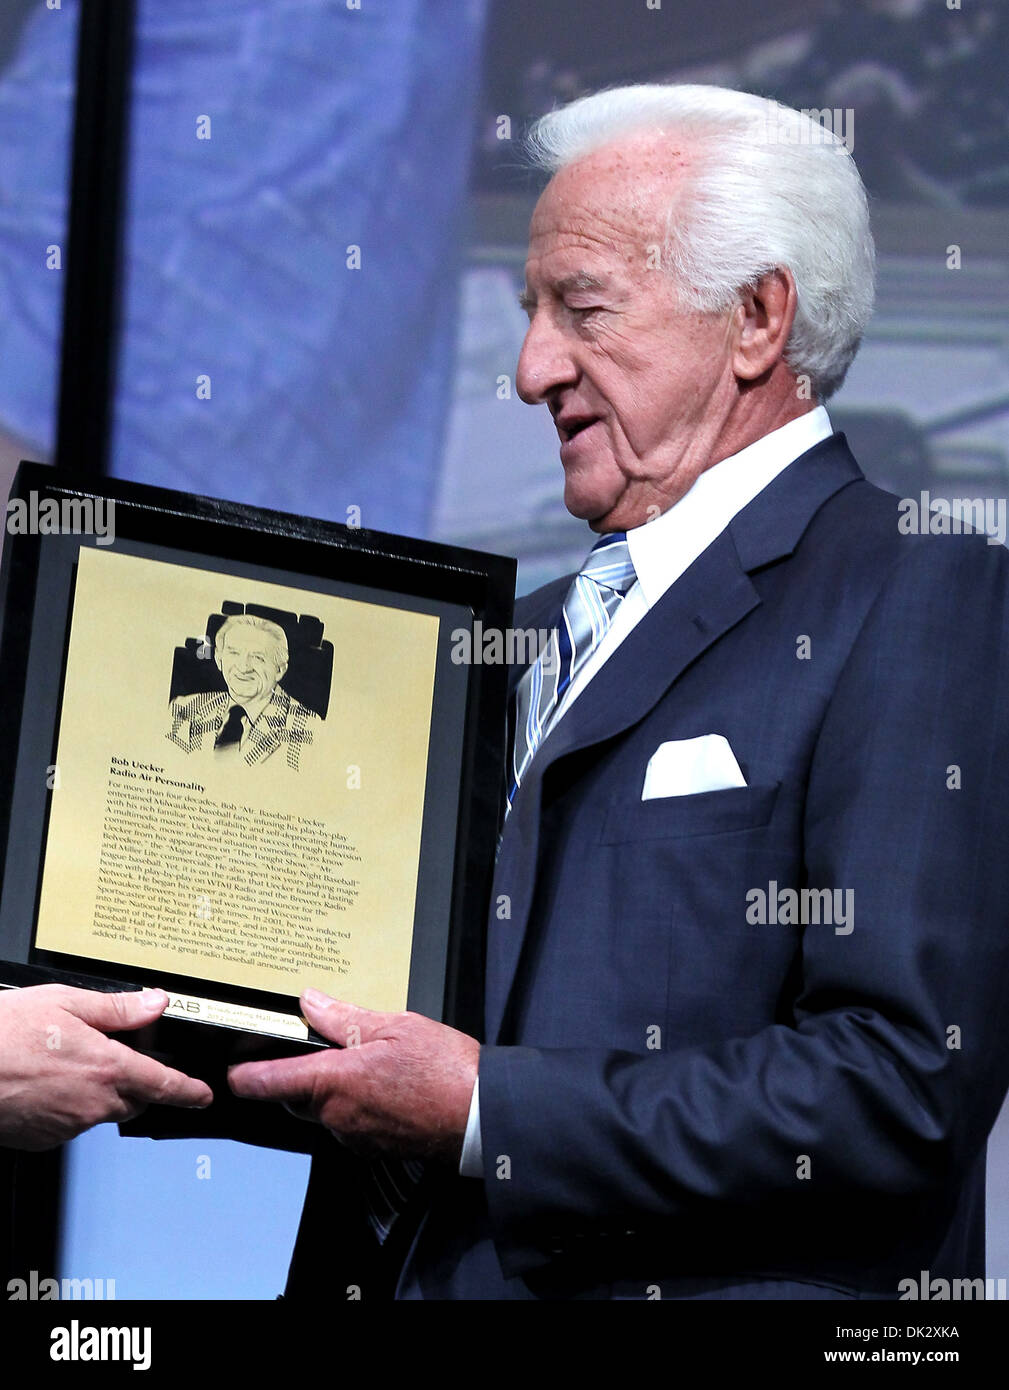 Bob Uecker Milwaukee Brewers Play-By-Play Voice Bob Uecker inducted Into  NAB Broadcasting Hall of Fame at NAB Las Vegas Hilton Stock Photo - Alamy